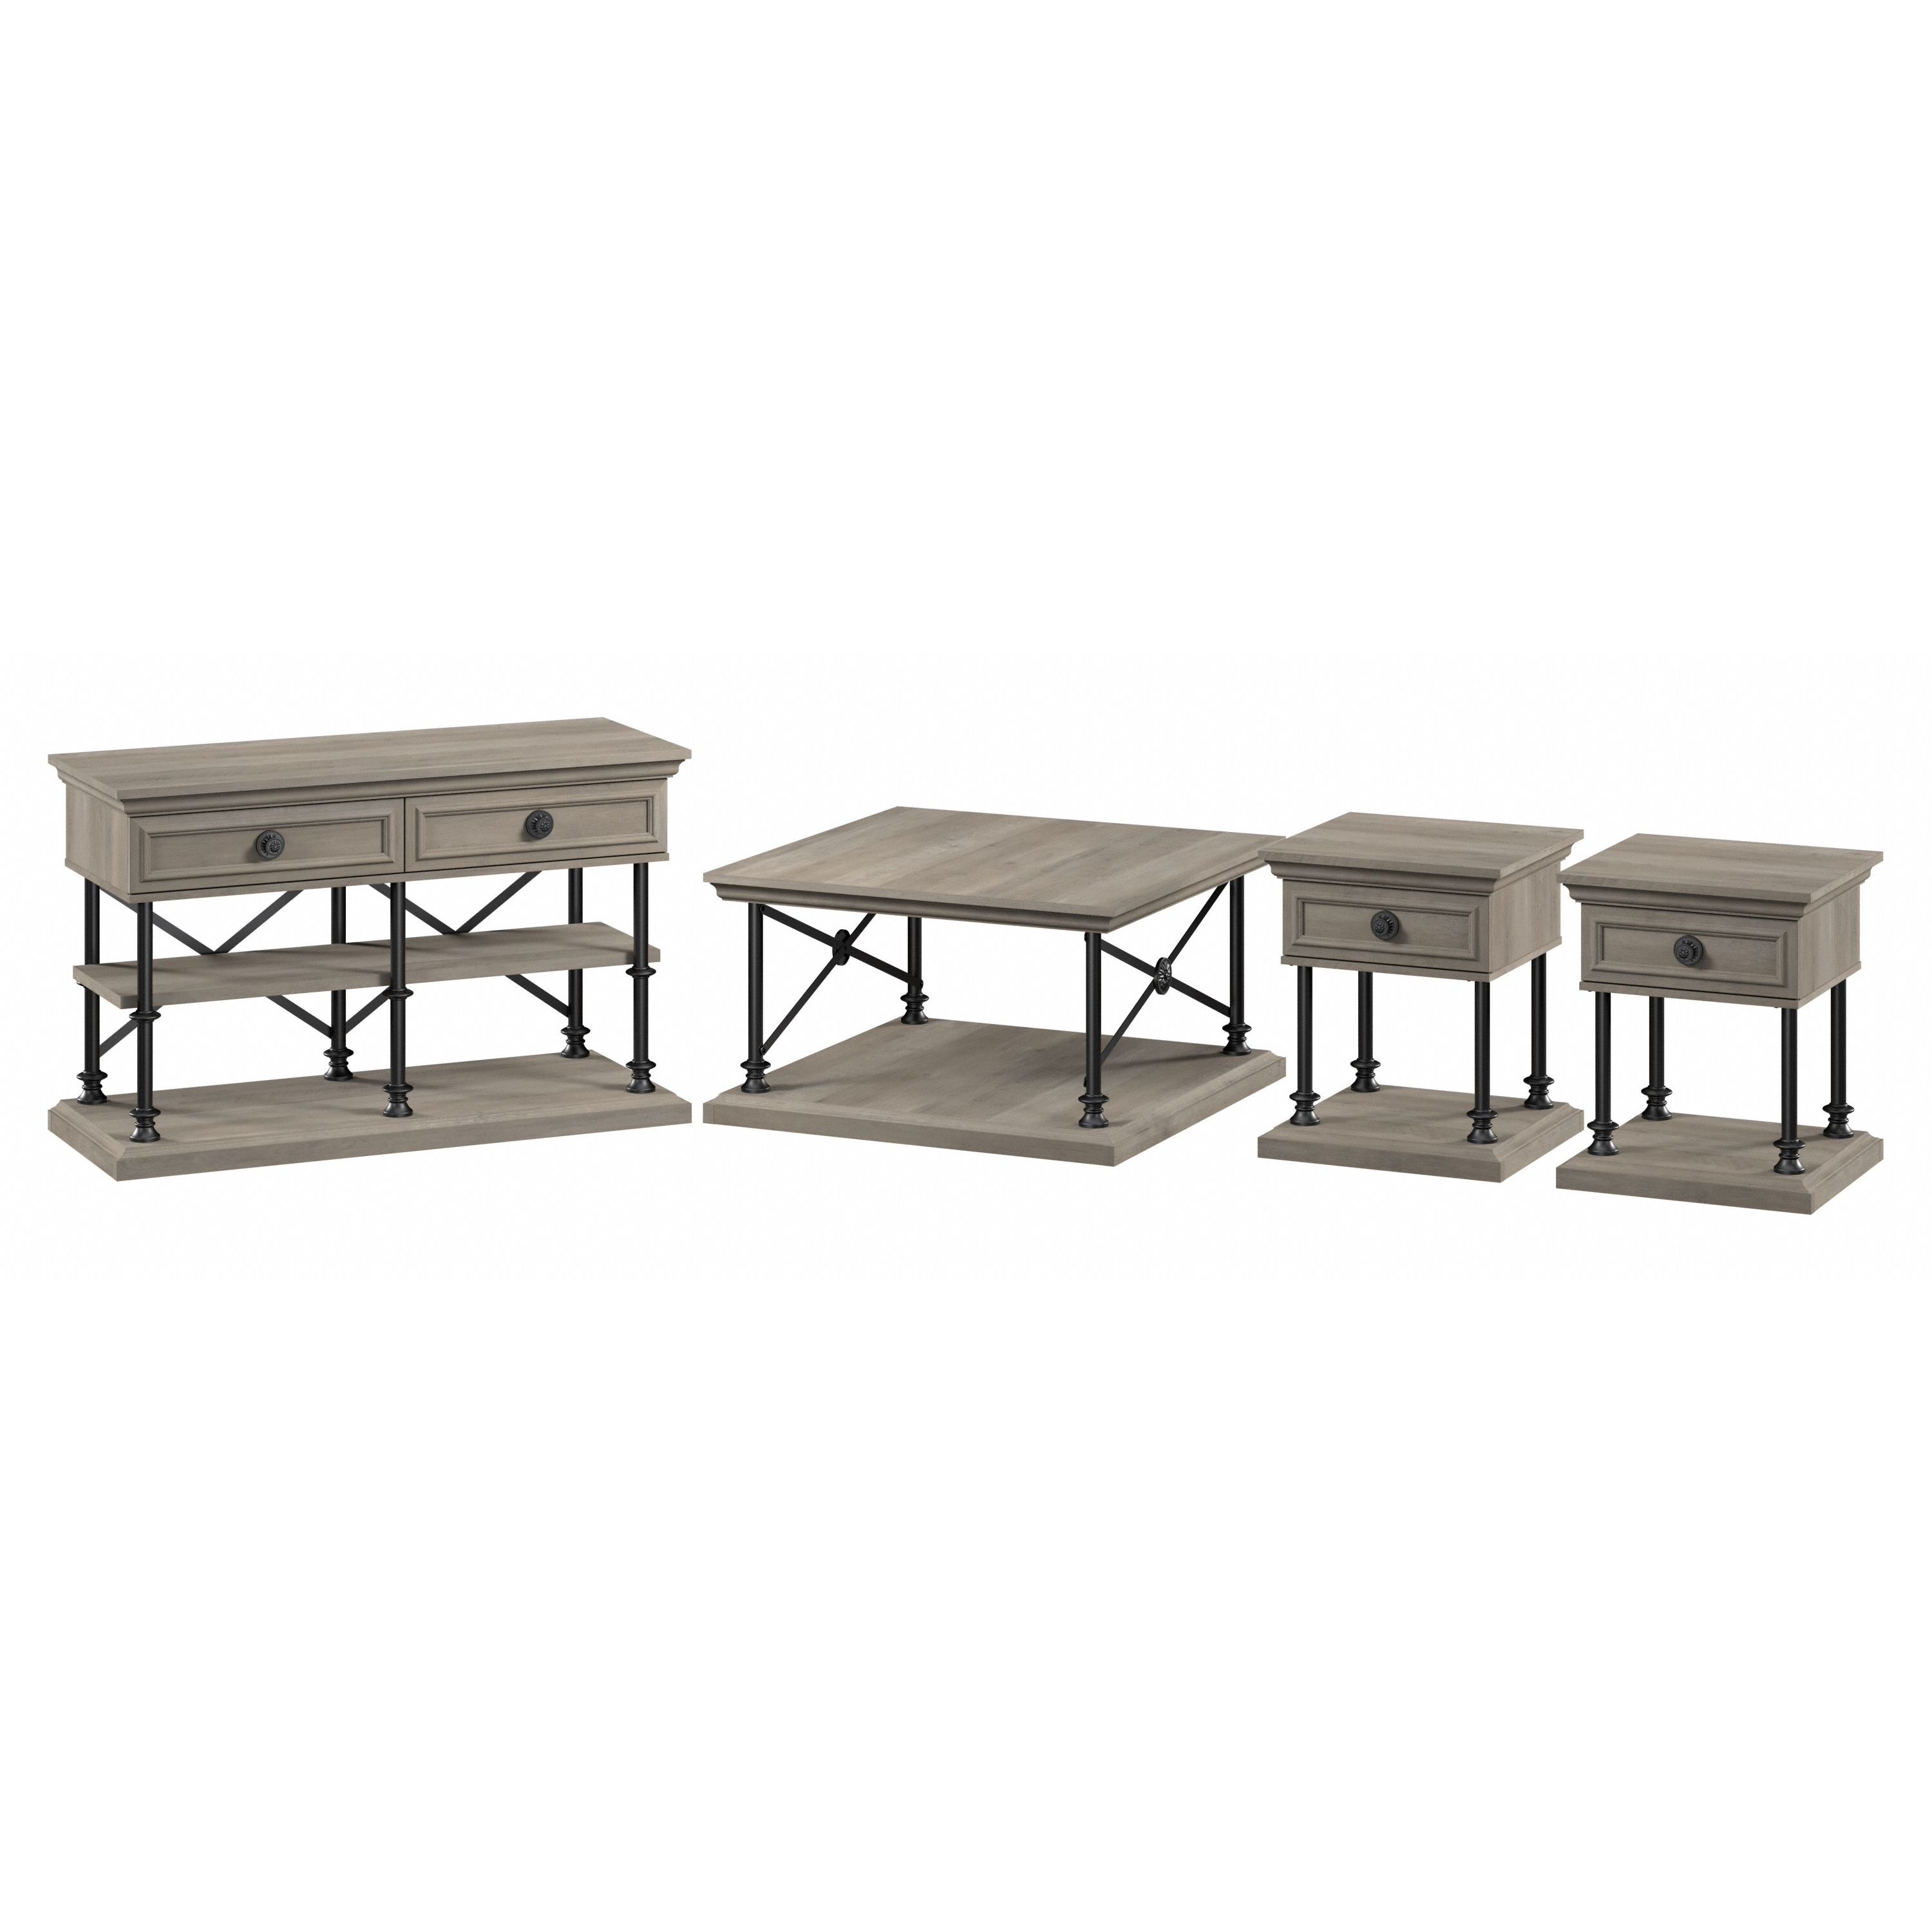 Shop Bush Furniture Coliseum Square Coffee Table, Console Table, and Two End Tables 02 CSM007DG #color_driftwood gray